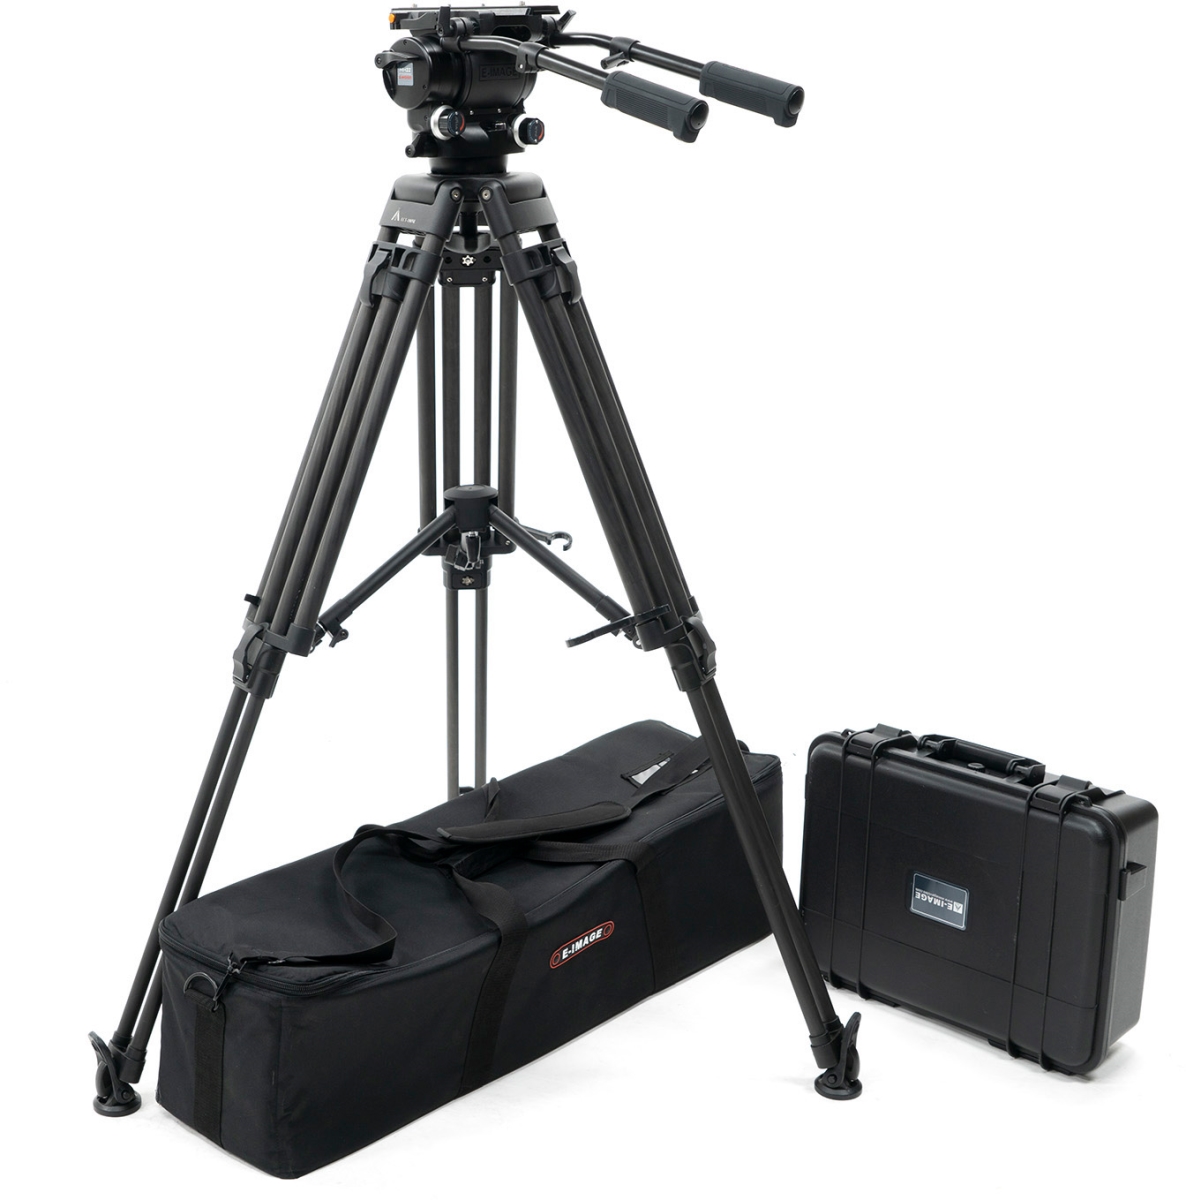 Picture of Eimage IKAN-MOTUS22 3-Stage Carbon Fiber Tripod Kit with 48.5 lbs Payload